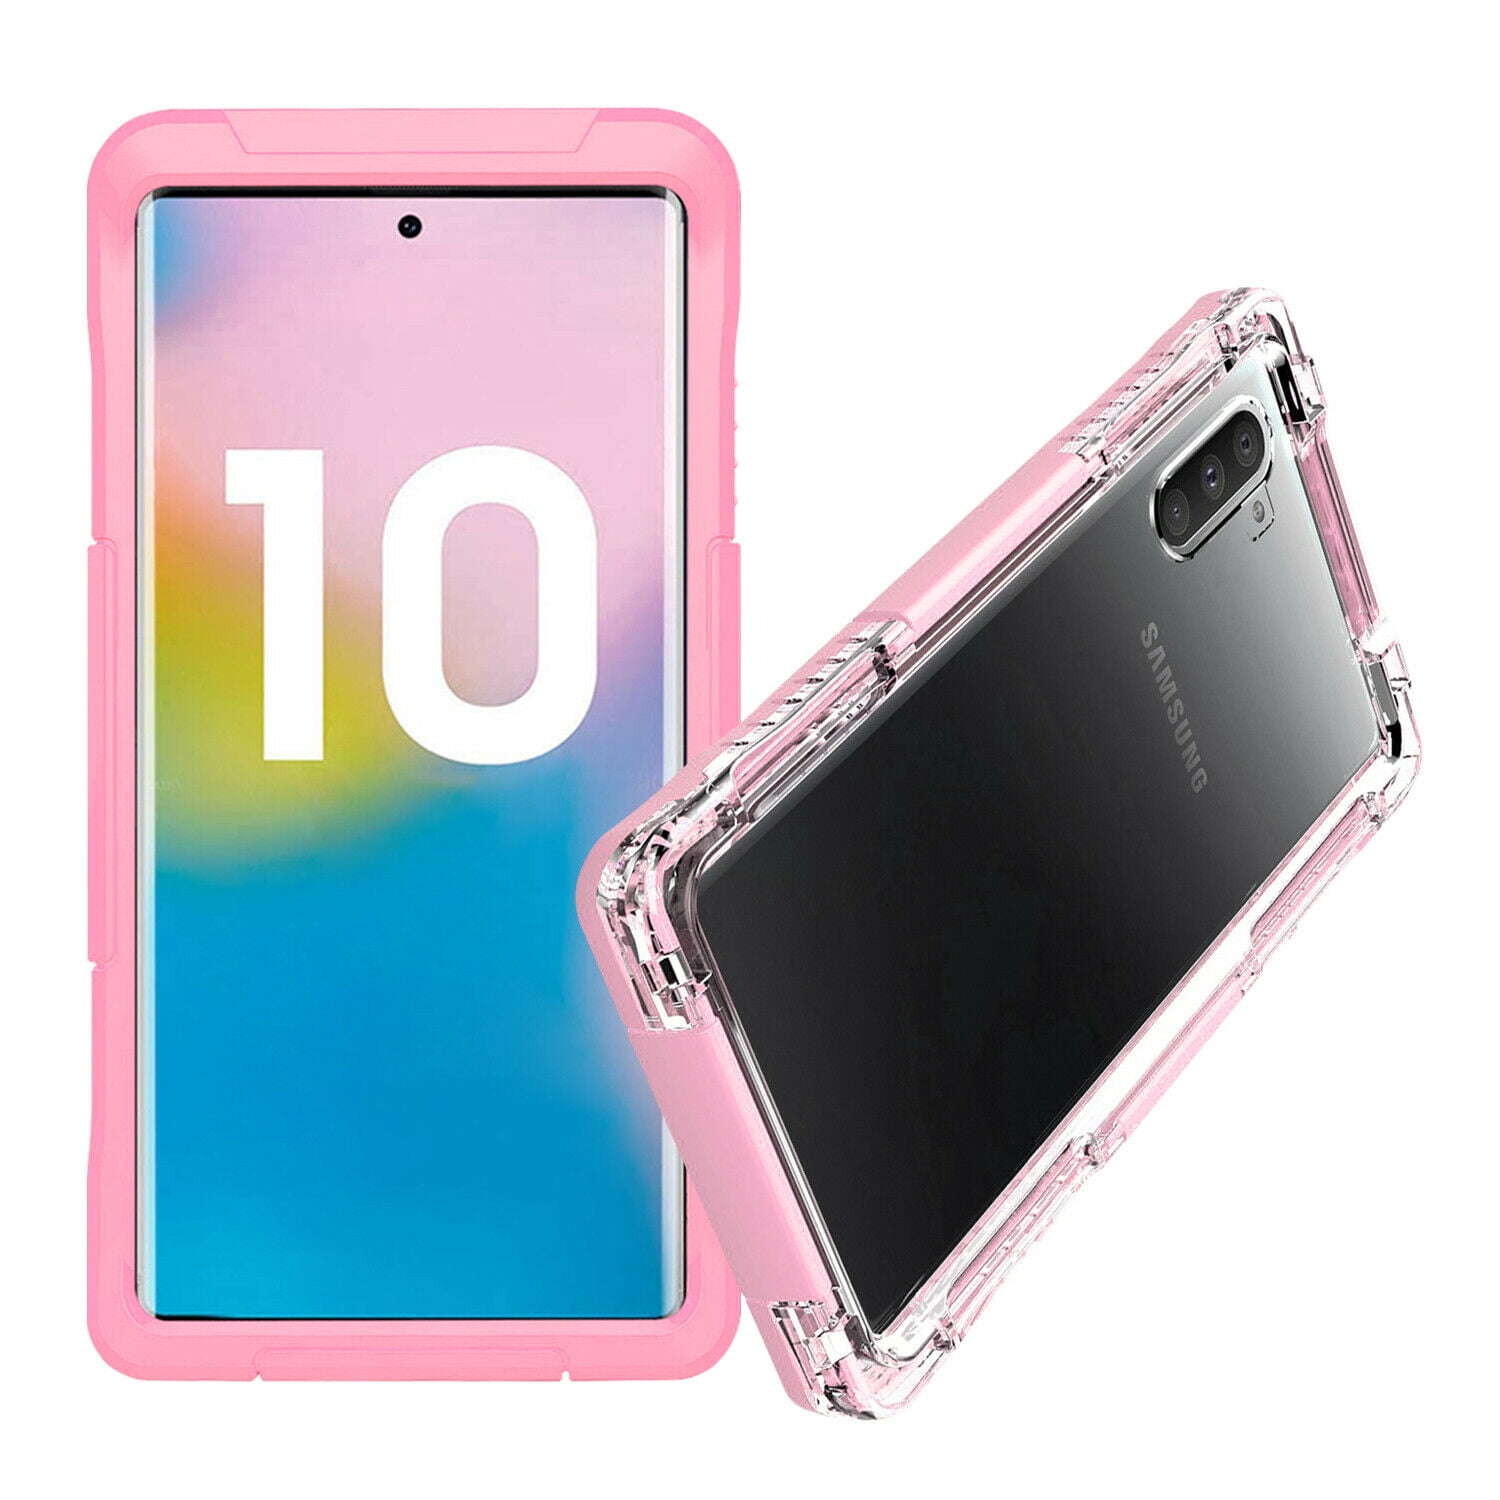 - Ghostek Atomic Slim Galaxy Note 10 Plus Case with Super Space Metal Bumper Note10+ 5G Cover Shockproof Military Grade Aluminum Bumper Heavy Duty Protection Wireless Charging 6.8 Inch Pink 